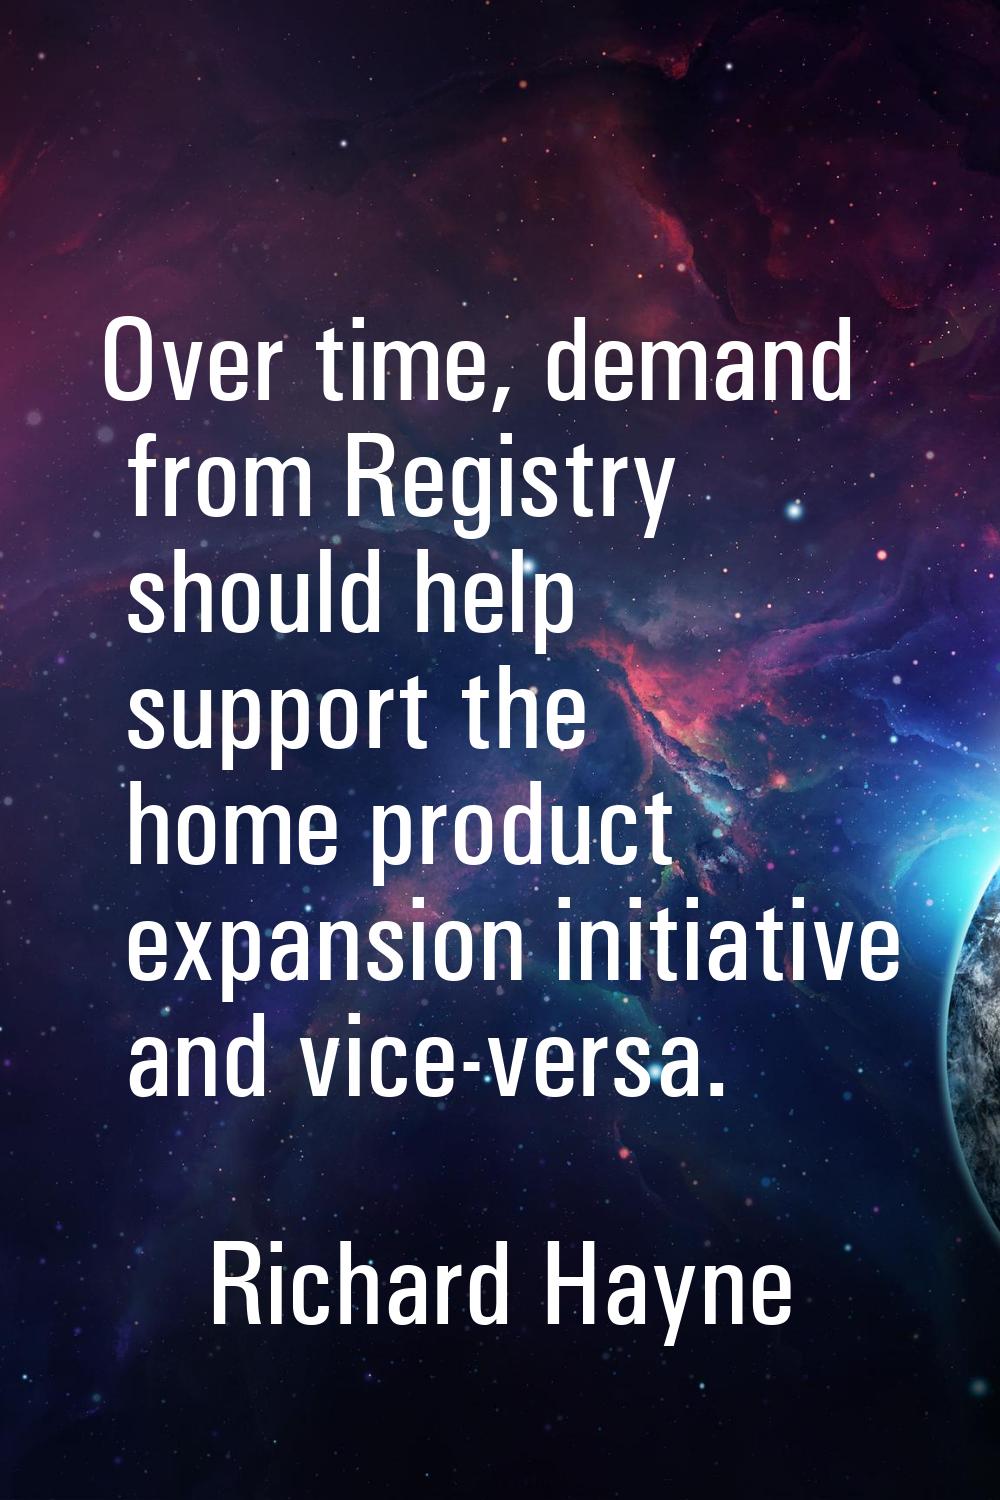 Over time, demand from Registry should help support the home product expansion initiative and vice-